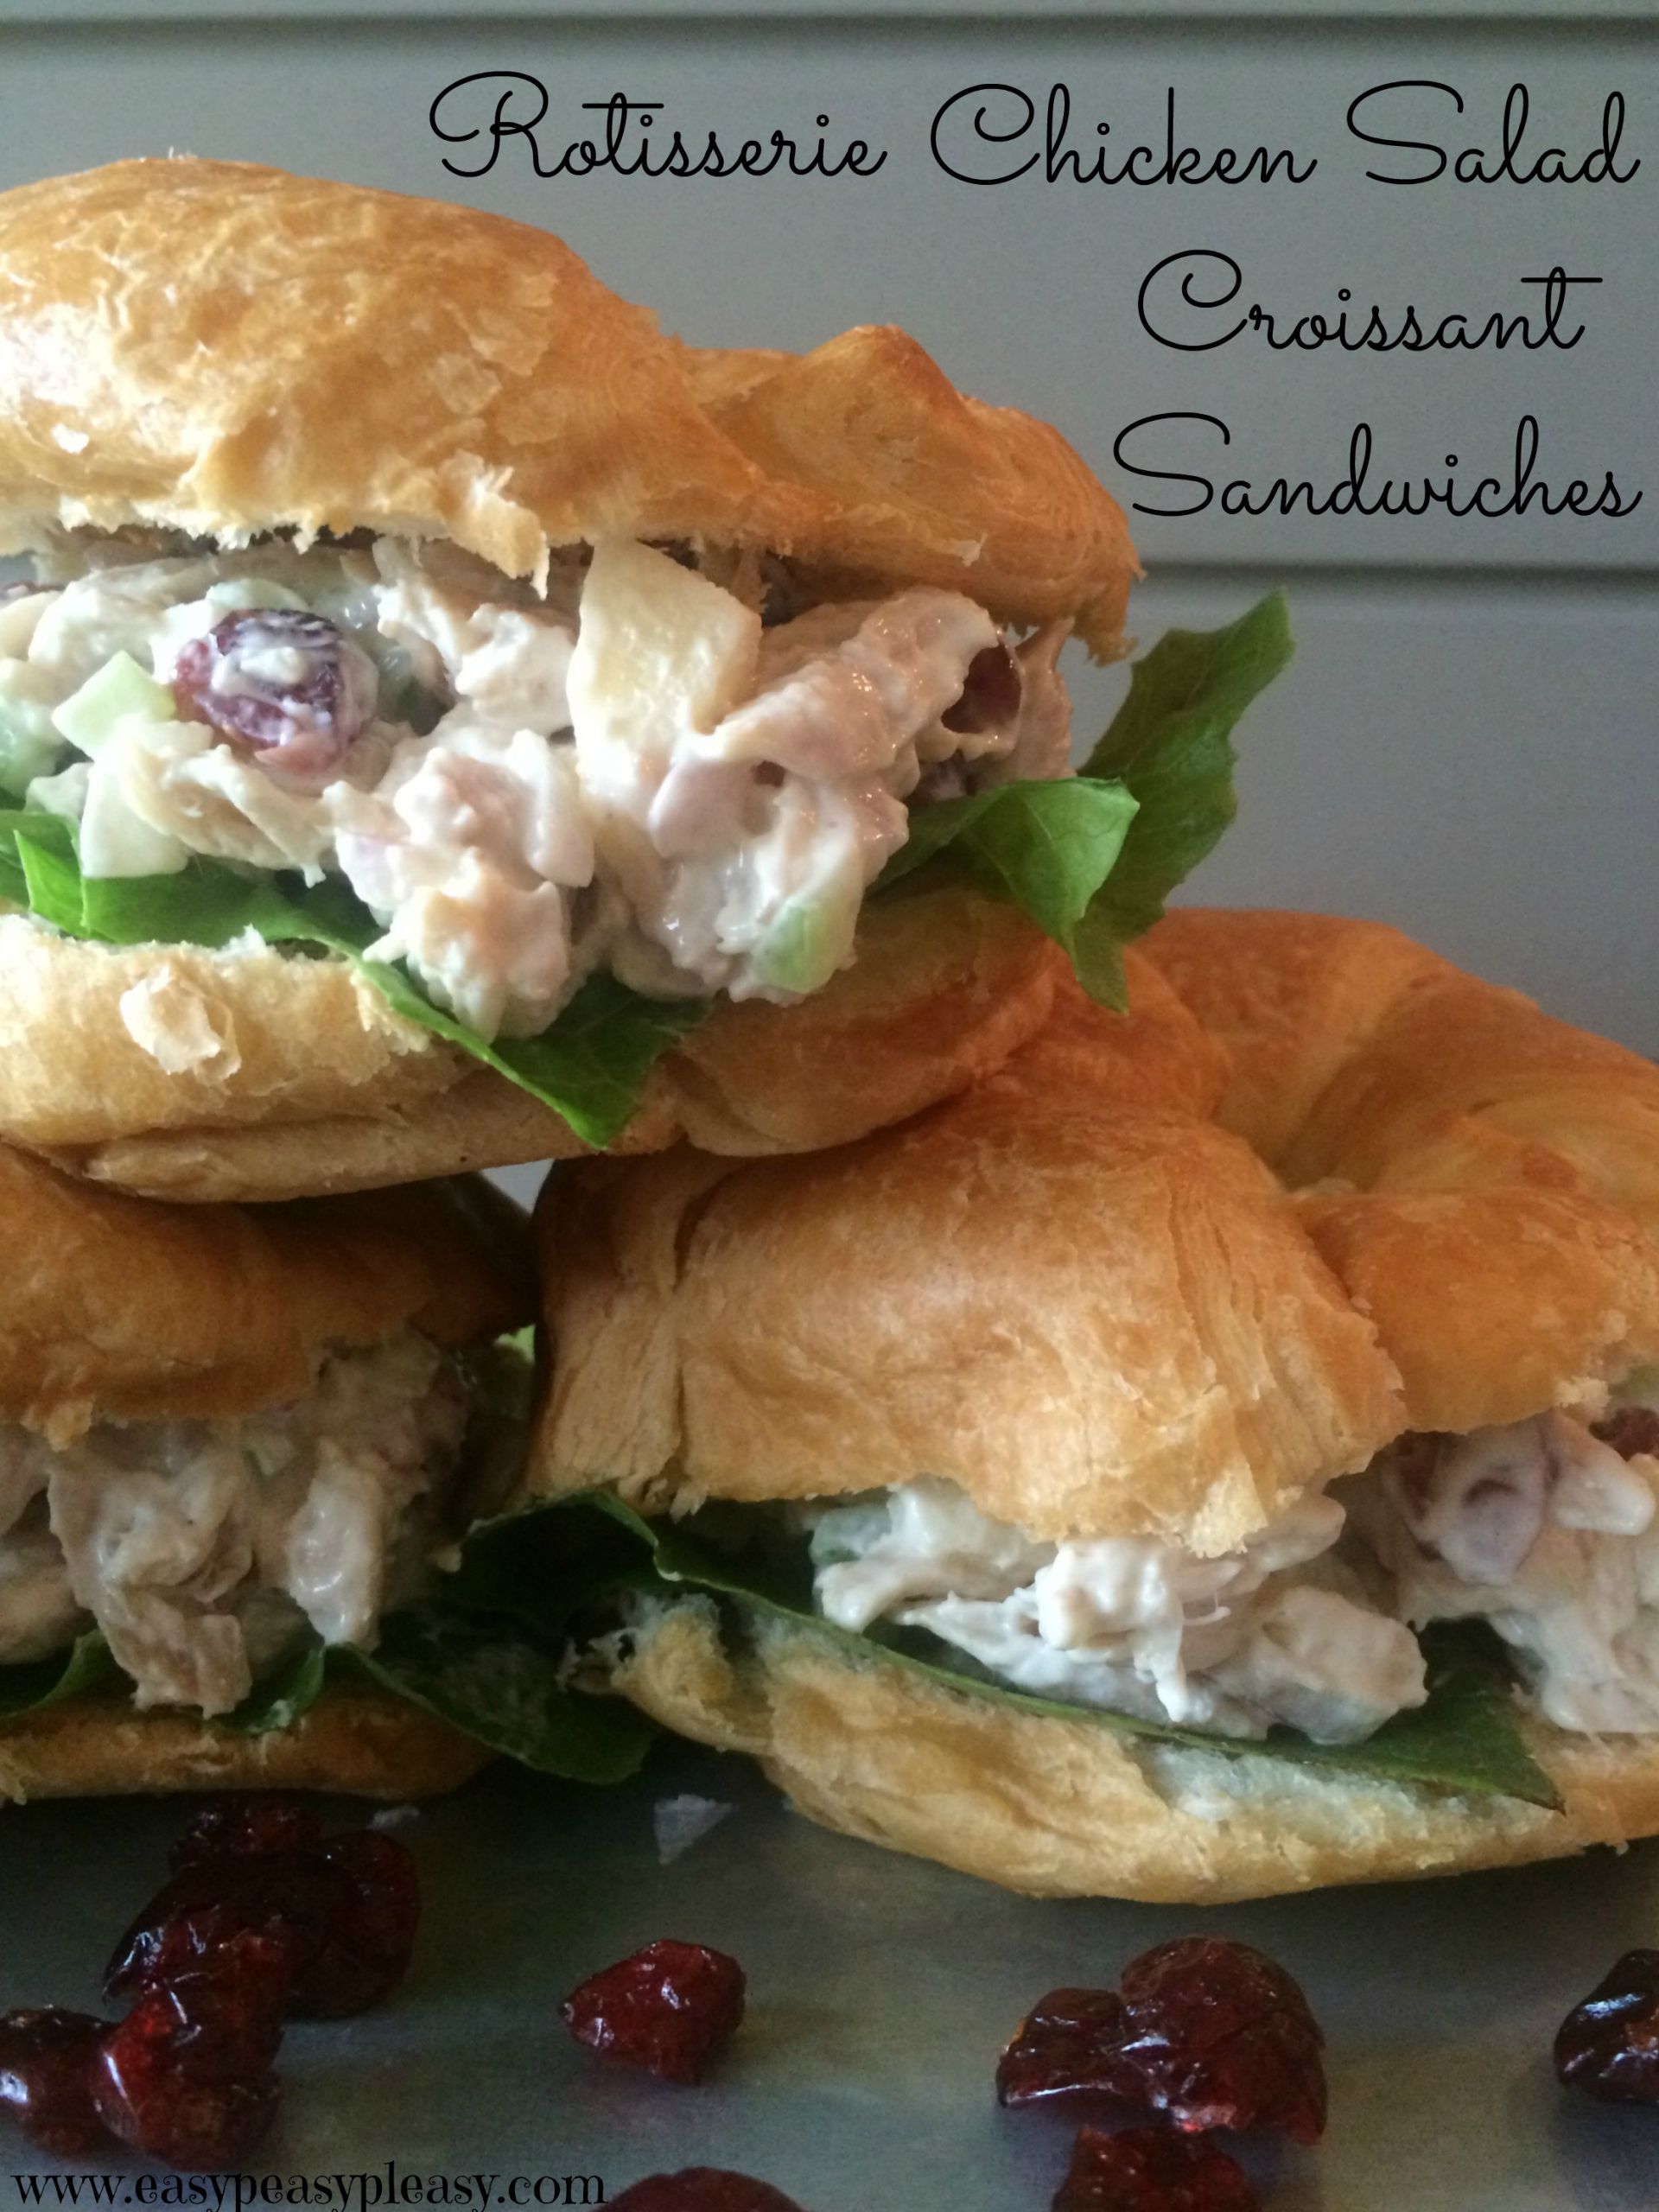 The 35 Best Ideas for Rotisserie Chicken Sandwiches - Home, Family ...